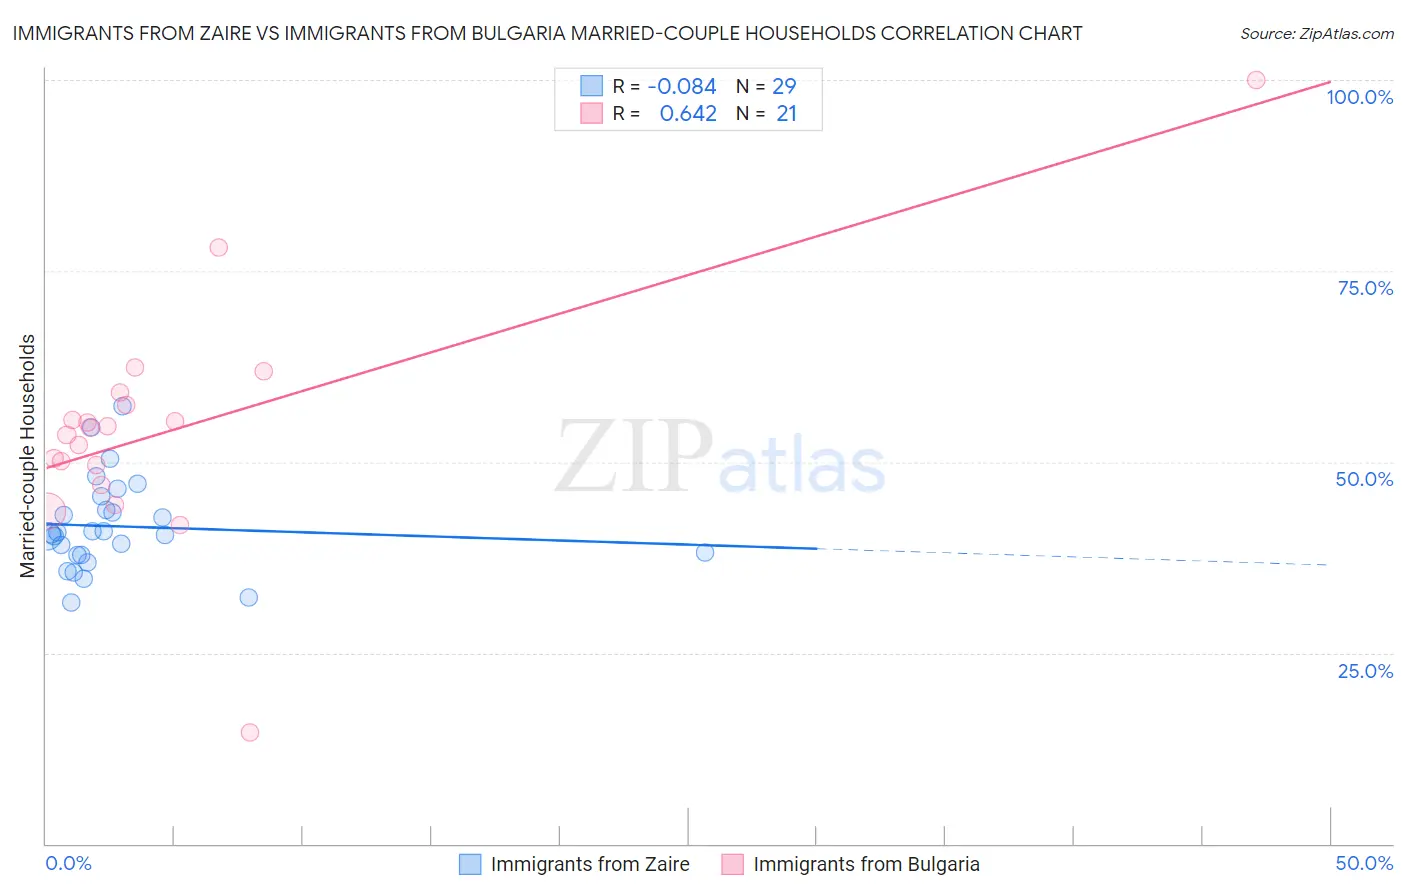 Immigrants from Zaire vs Immigrants from Bulgaria Married-couple Households